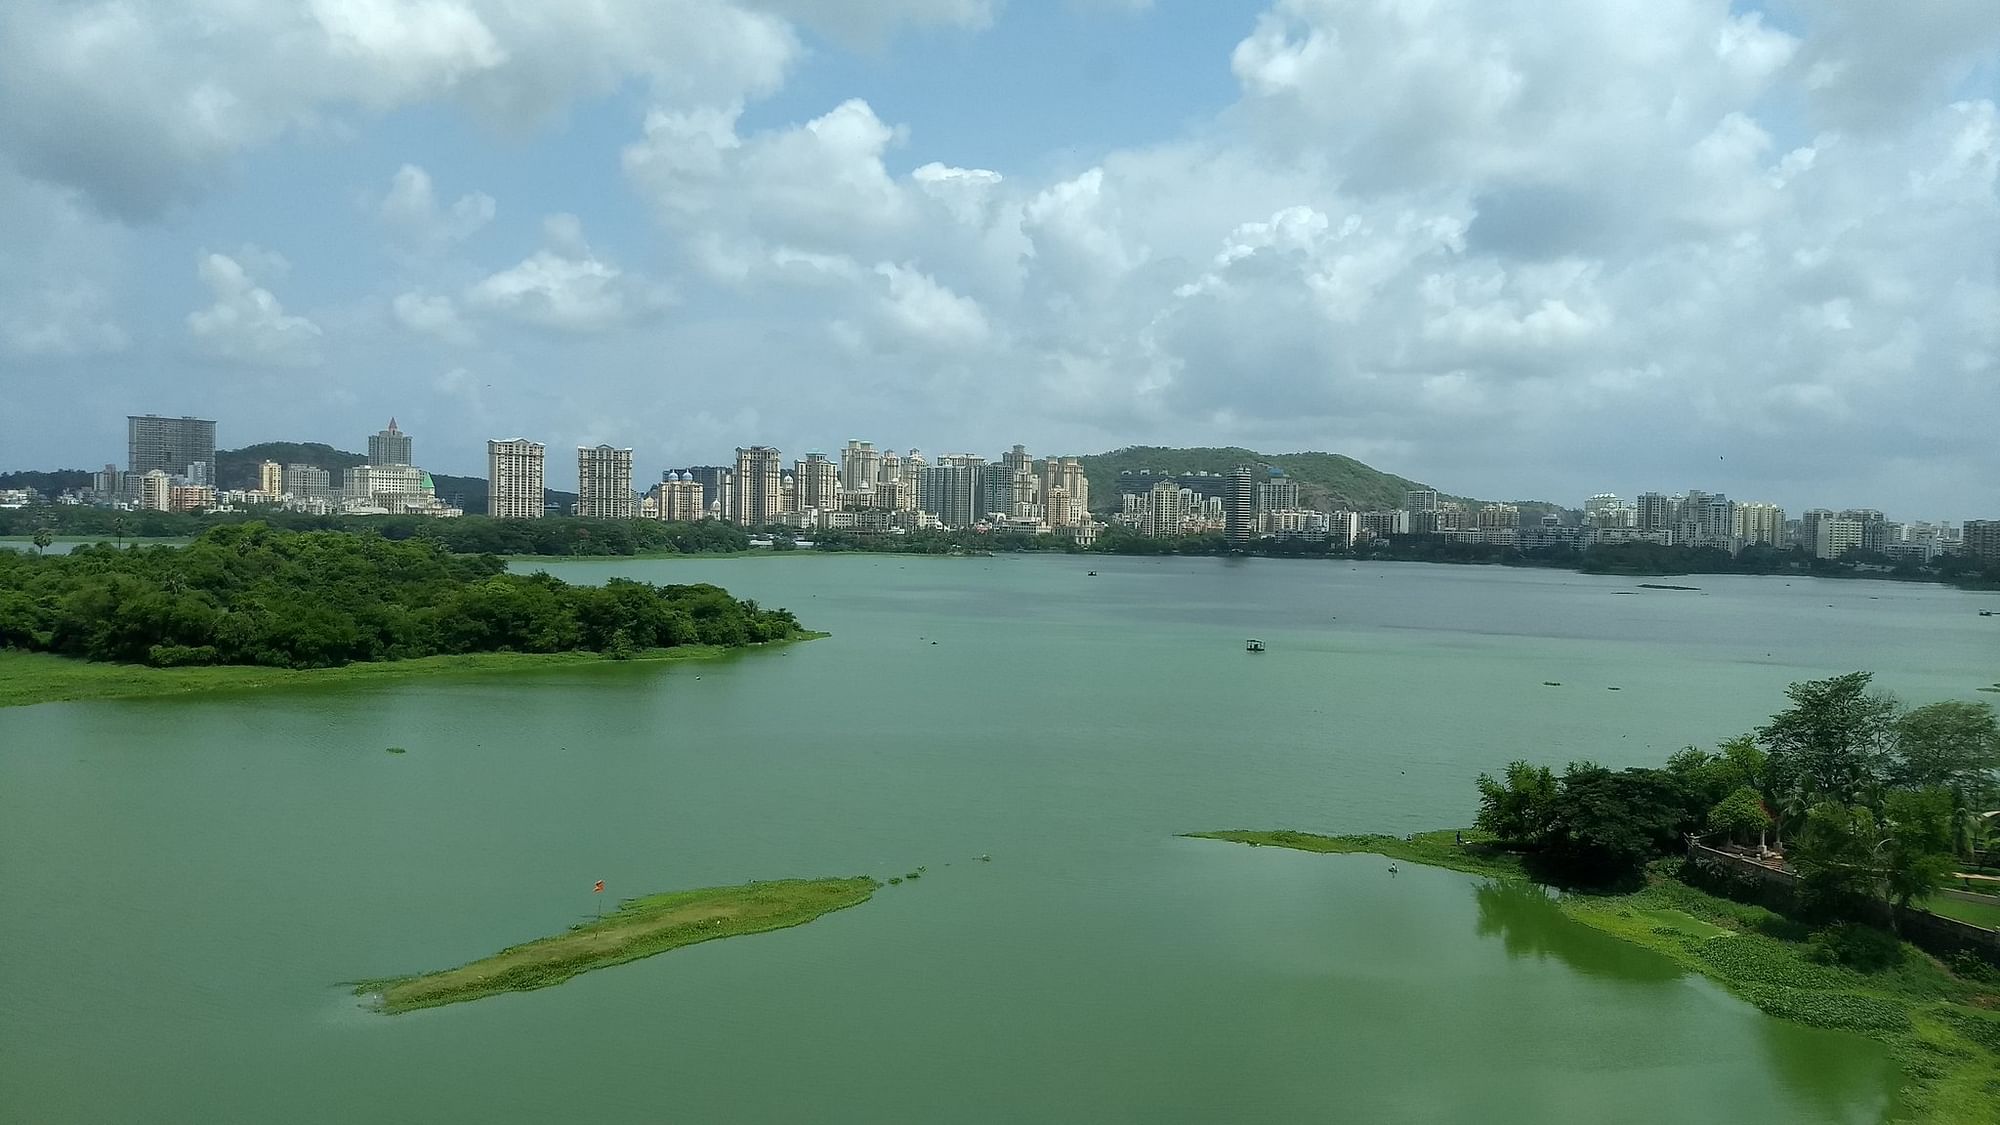 A shortage of water in Mumbai’s lakes has led to water cuts in the city.